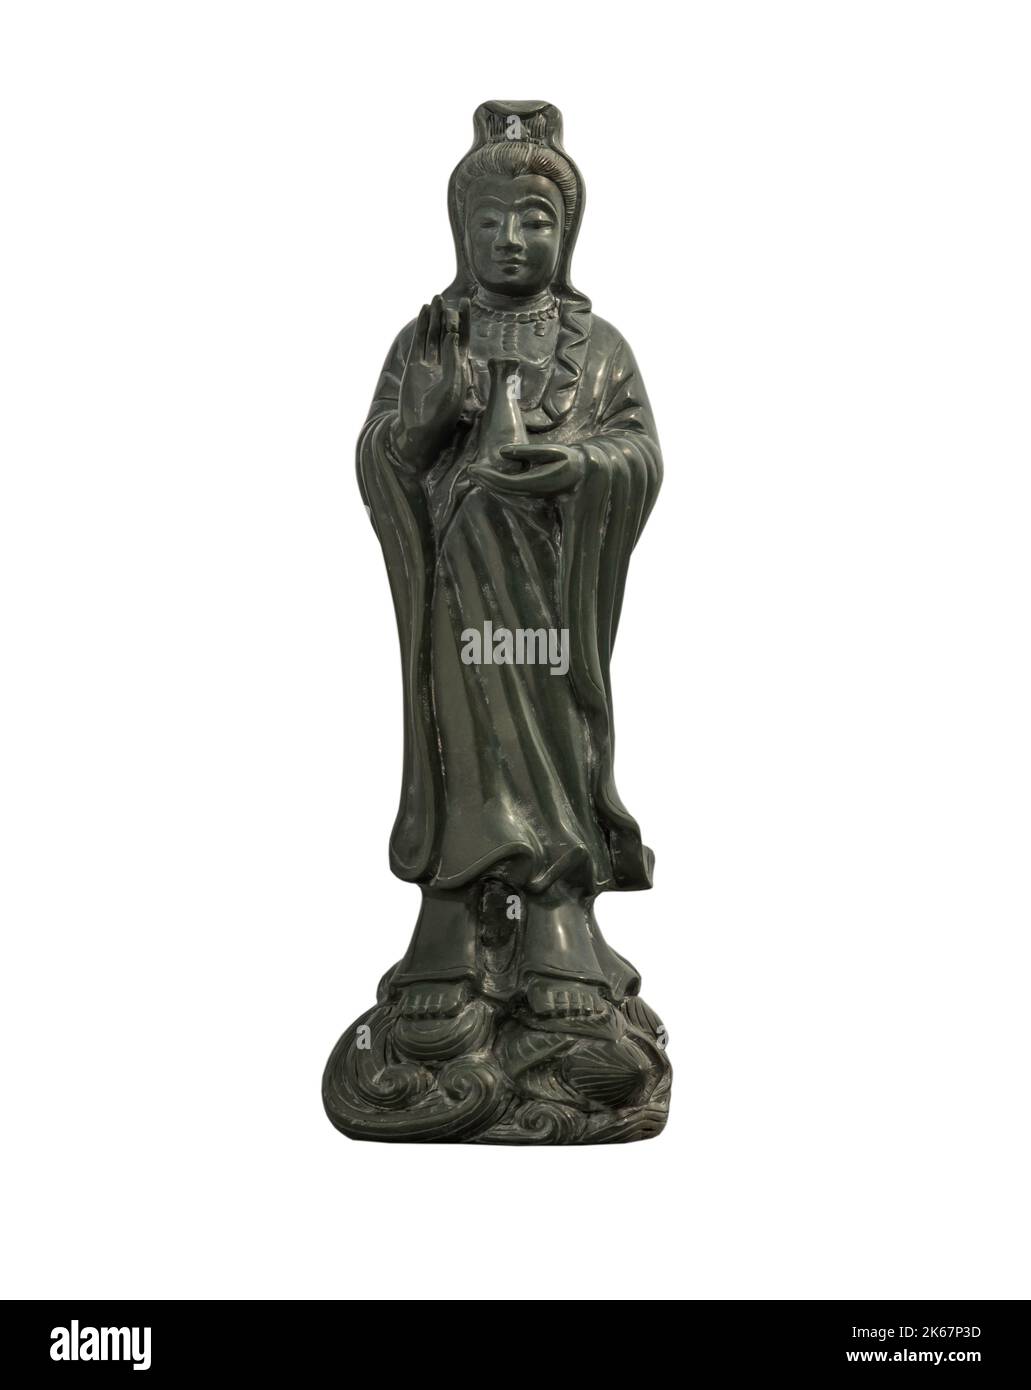 Figurine of Green Guan Yin Bodhisattva or Quan yin buddha statue (Goddess of mercy) isolated on white background with clipping path. Selective focus. Stock Photo